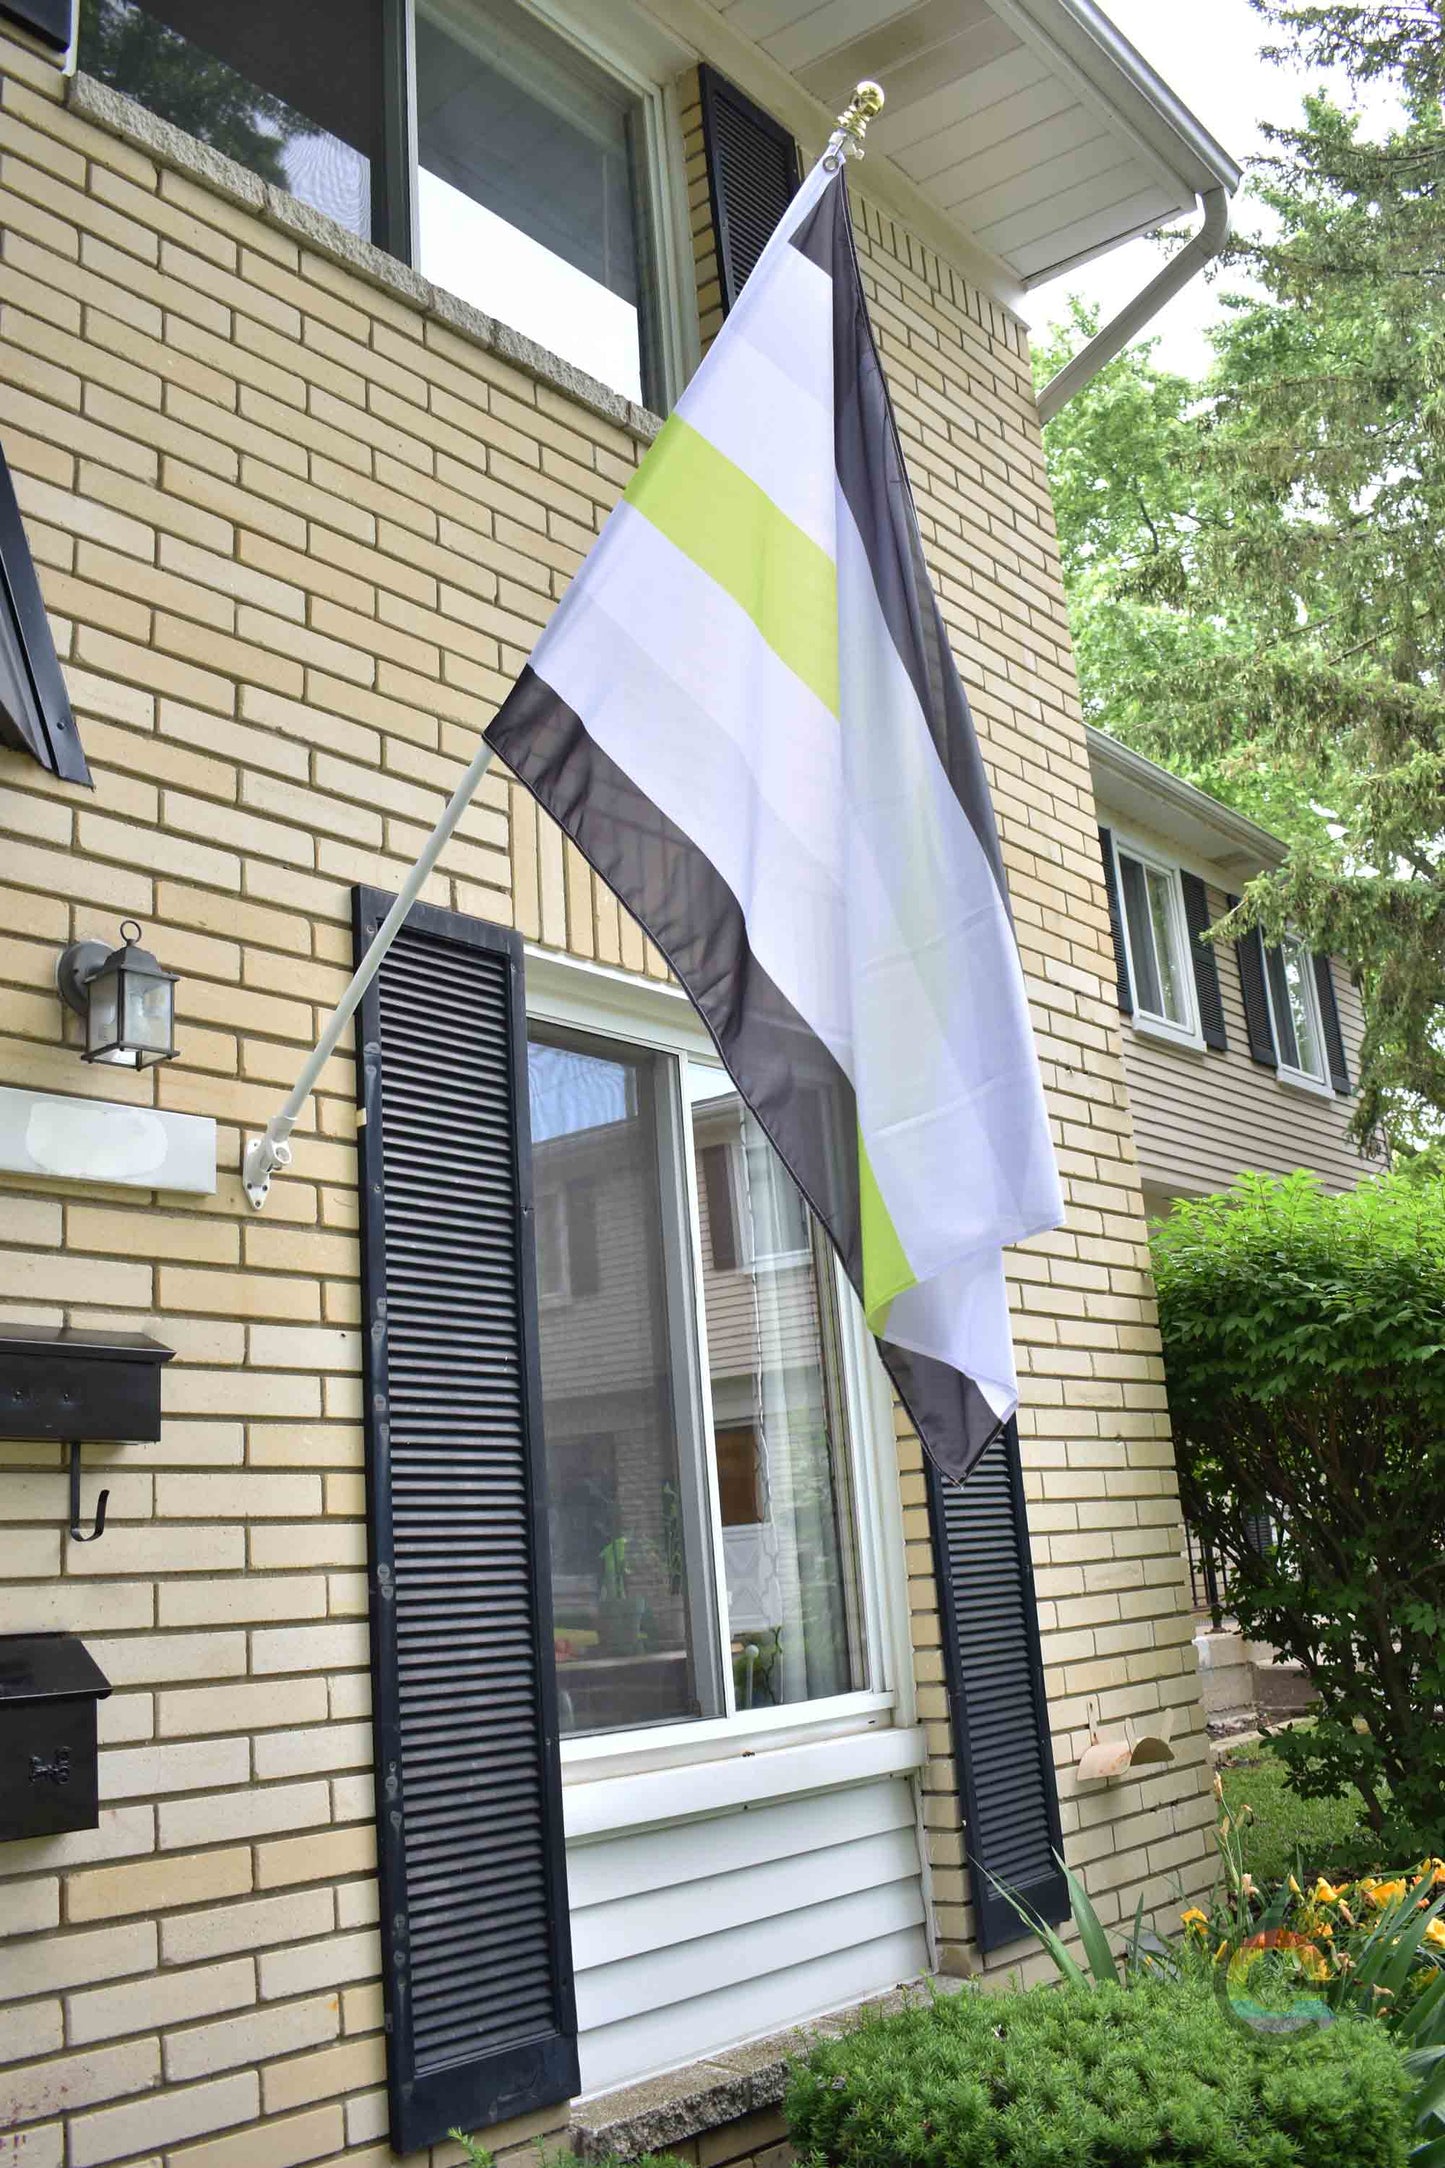 3’x5’ agender pride flag hanging from a flagpole on the outside of a light brick house with dark shutters